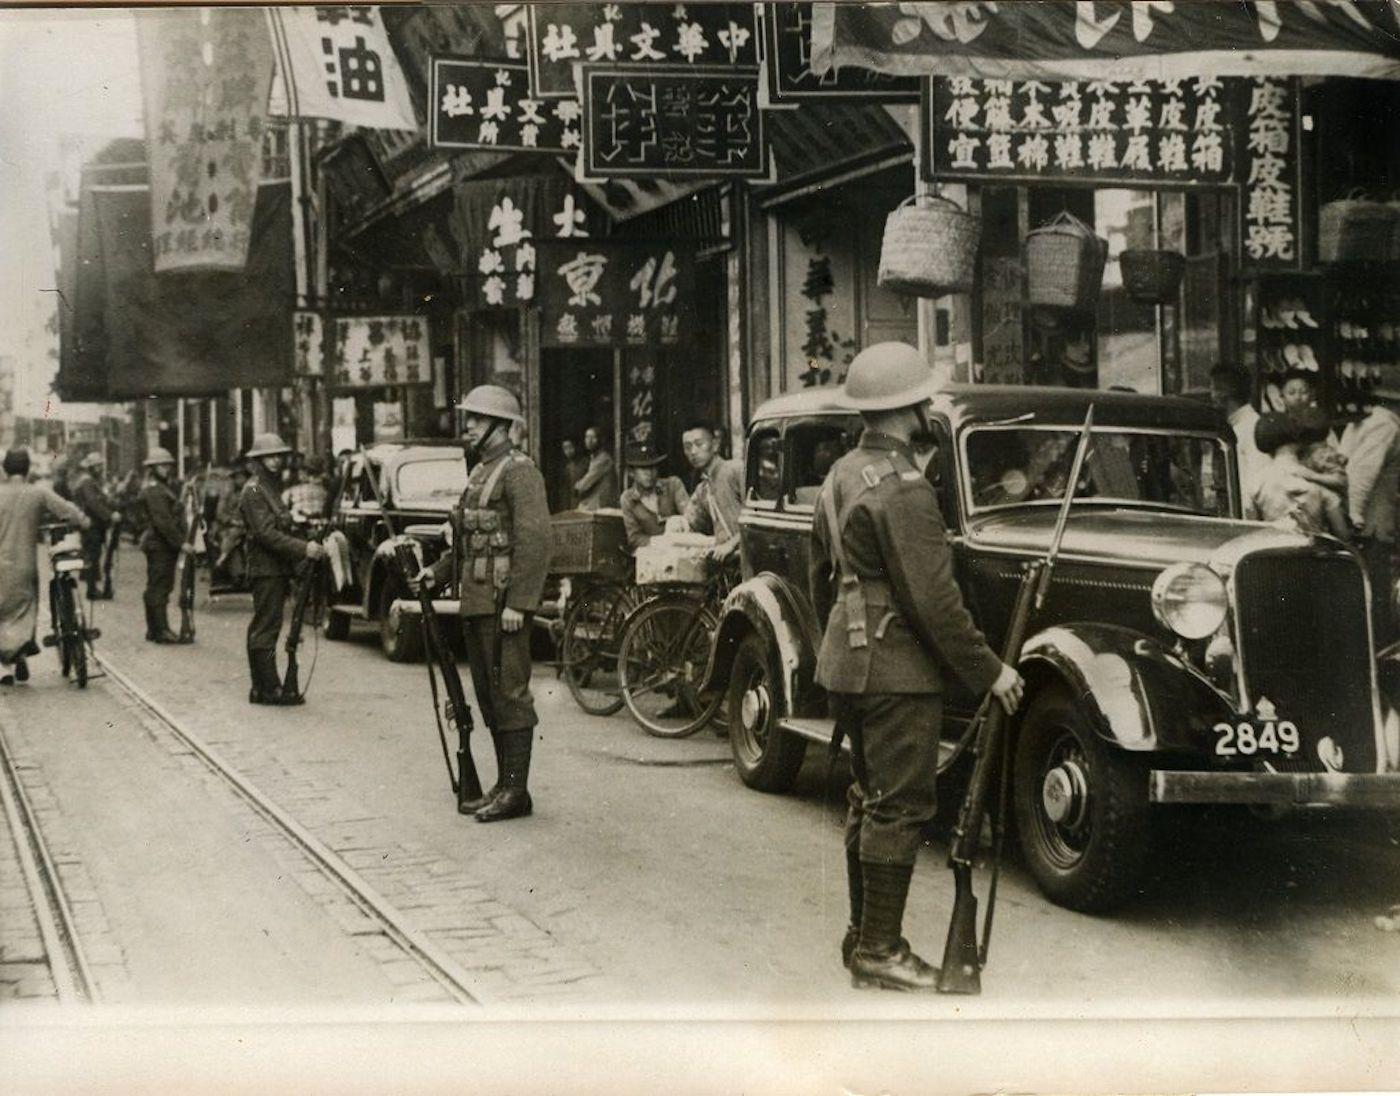 Unknown Black and White Photograph - English Soldiers in Shanghai during occupation - Vintage Photo 1939